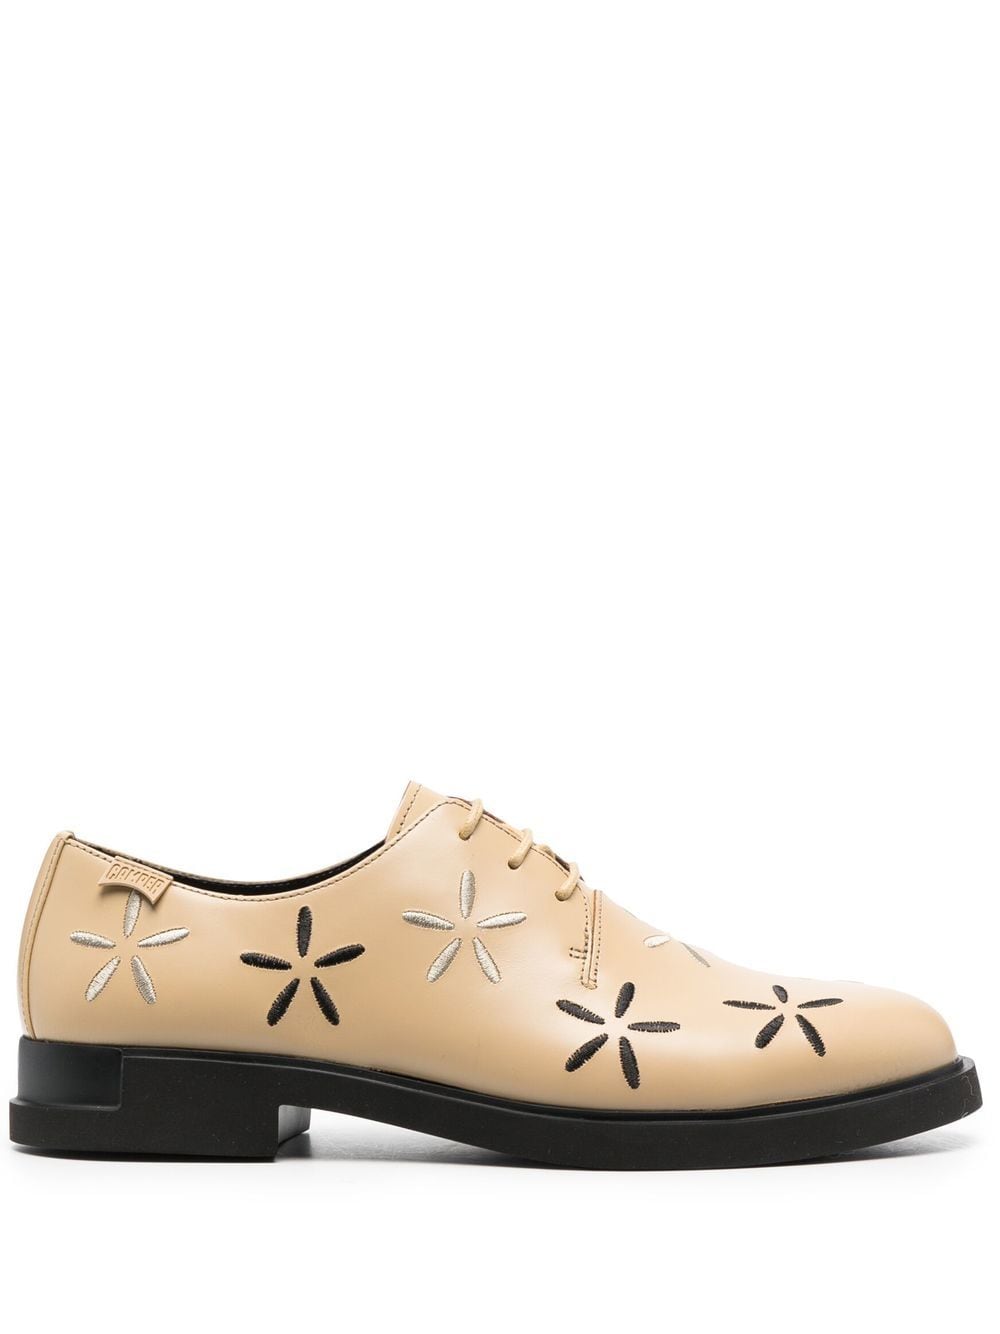 Twins Iman floral-embroidered brogues